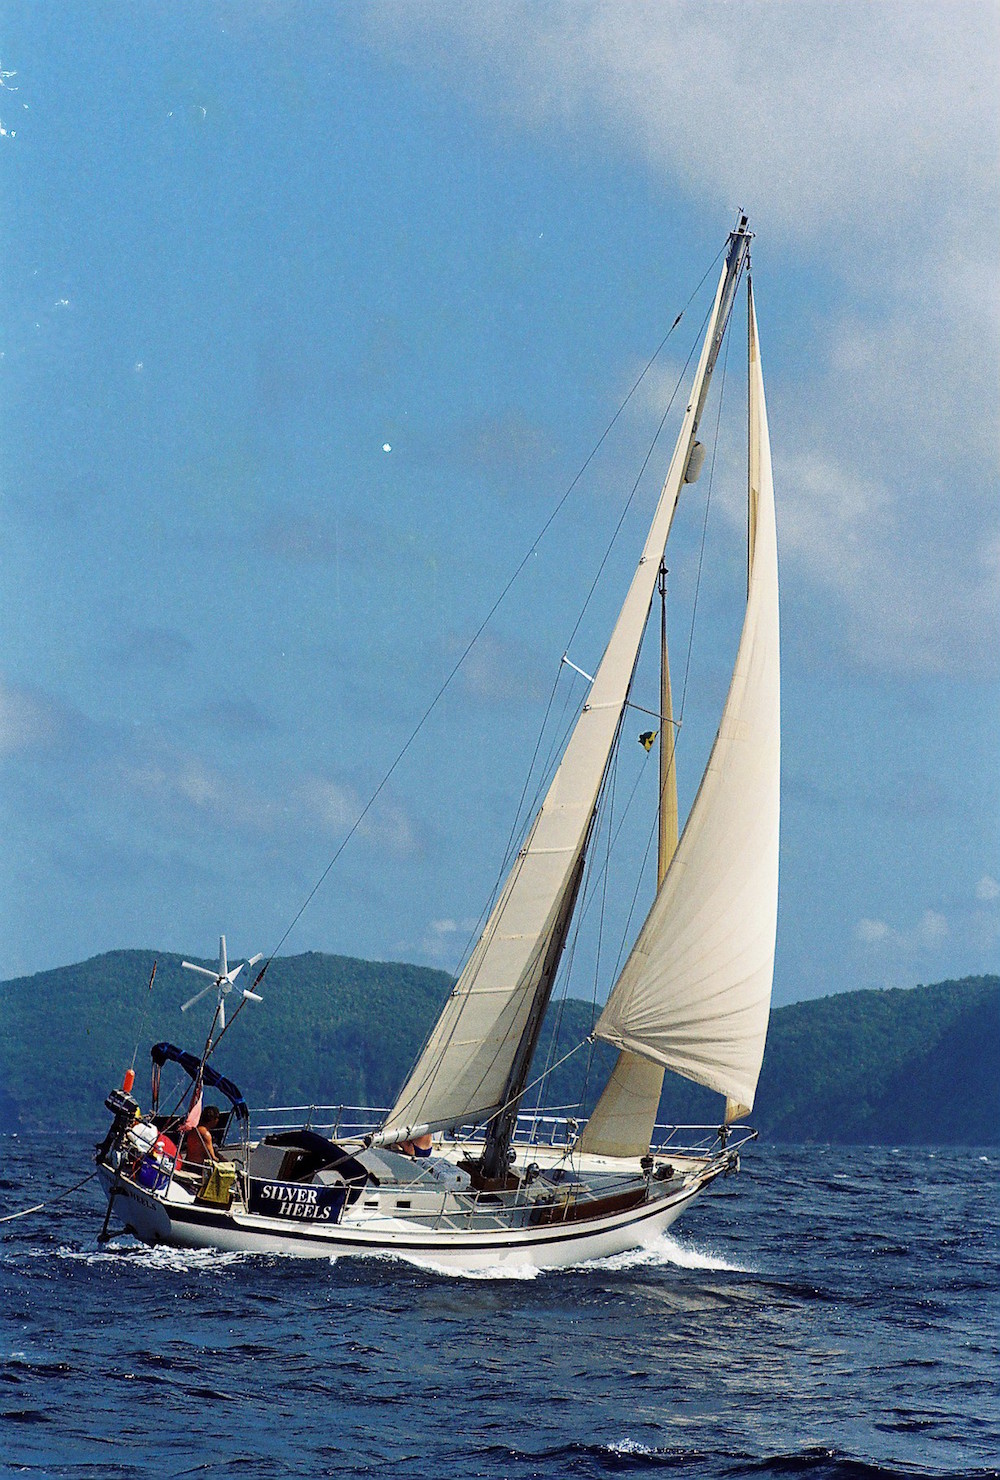 Tradewind 35 long-keeled production cruising yacht designed prior to 1988, and one of 13 type approved yachts available to enter the 2018 Golden Globe solo non-stop round the world race.